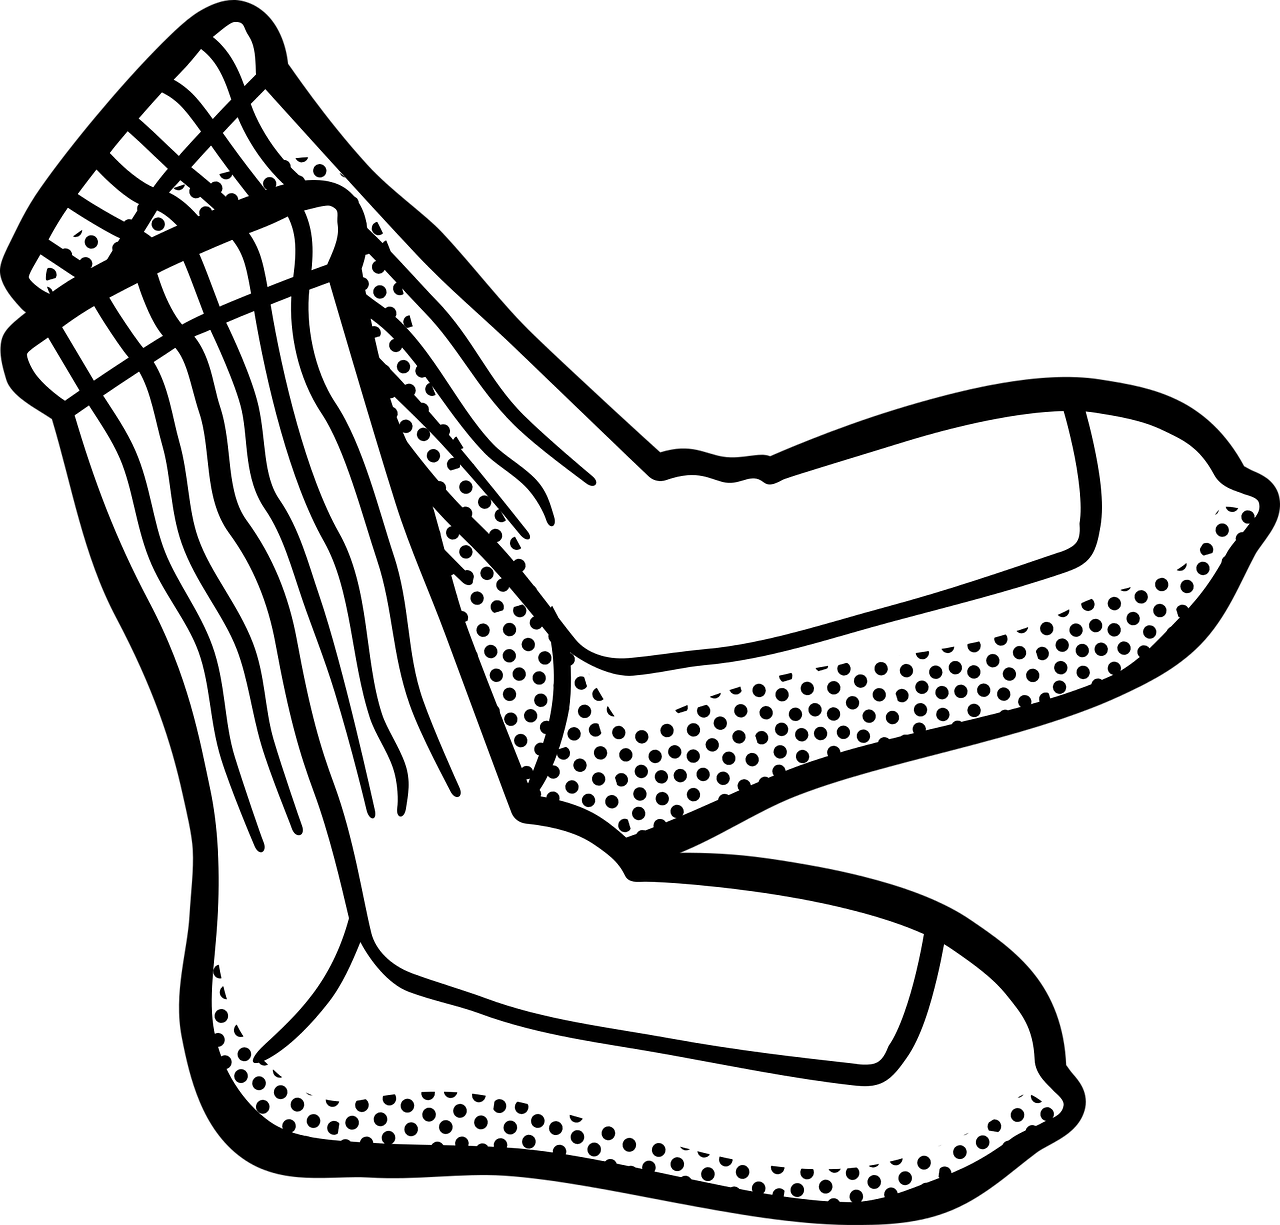 a pair of socks on a black background, inspired by Josef Šíma, pixabay, sots art, black and white vector art, cold freezing nights, woodcut style, isolated on white background